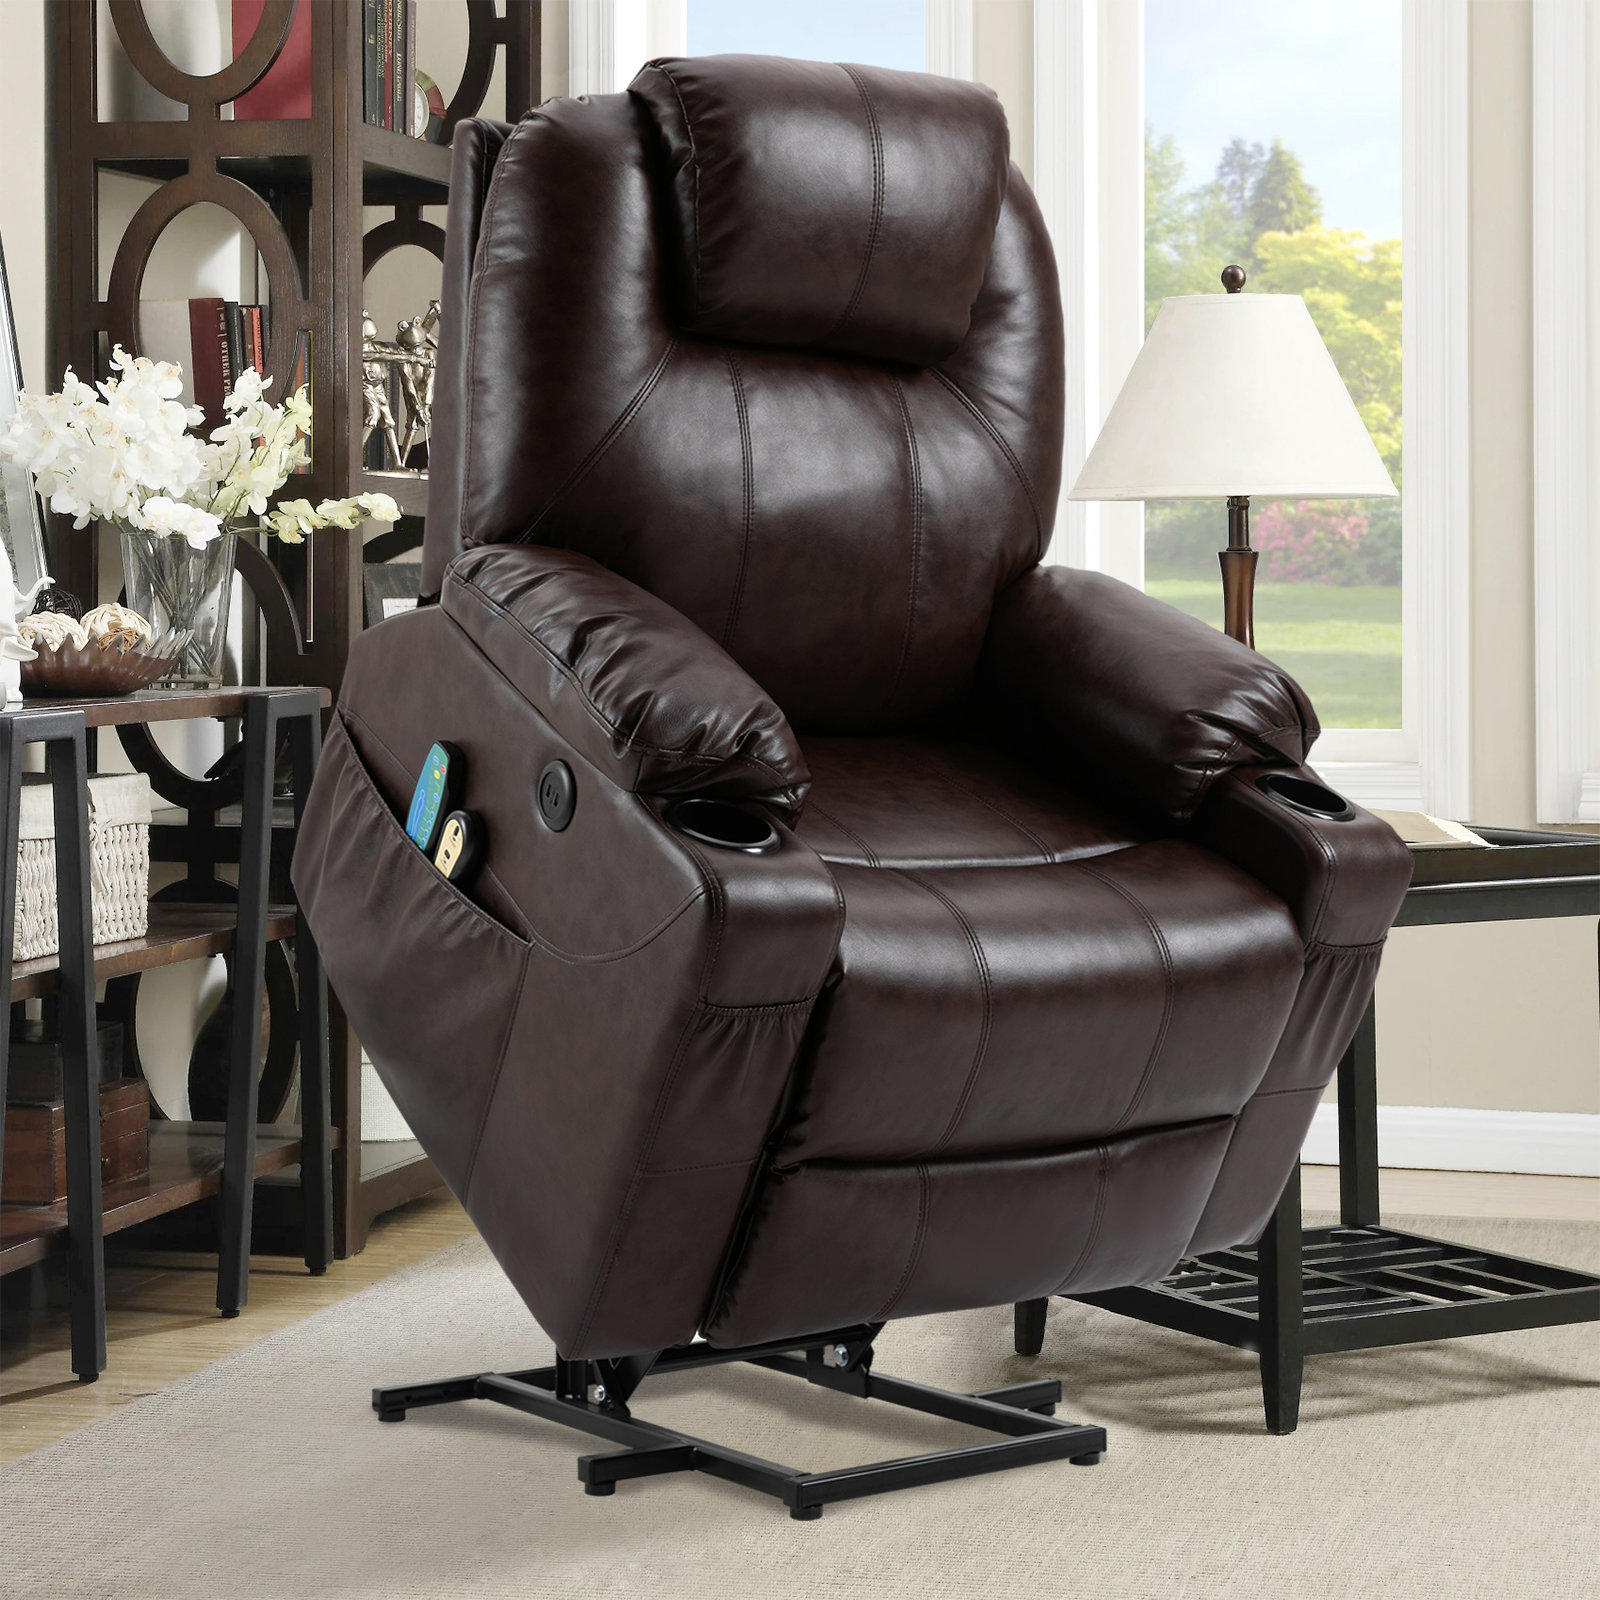 Swivel Rocker Recliner Chair for Living Room with Cup Holders Pillow Latitude Run Leather Type: Black Faux Leather